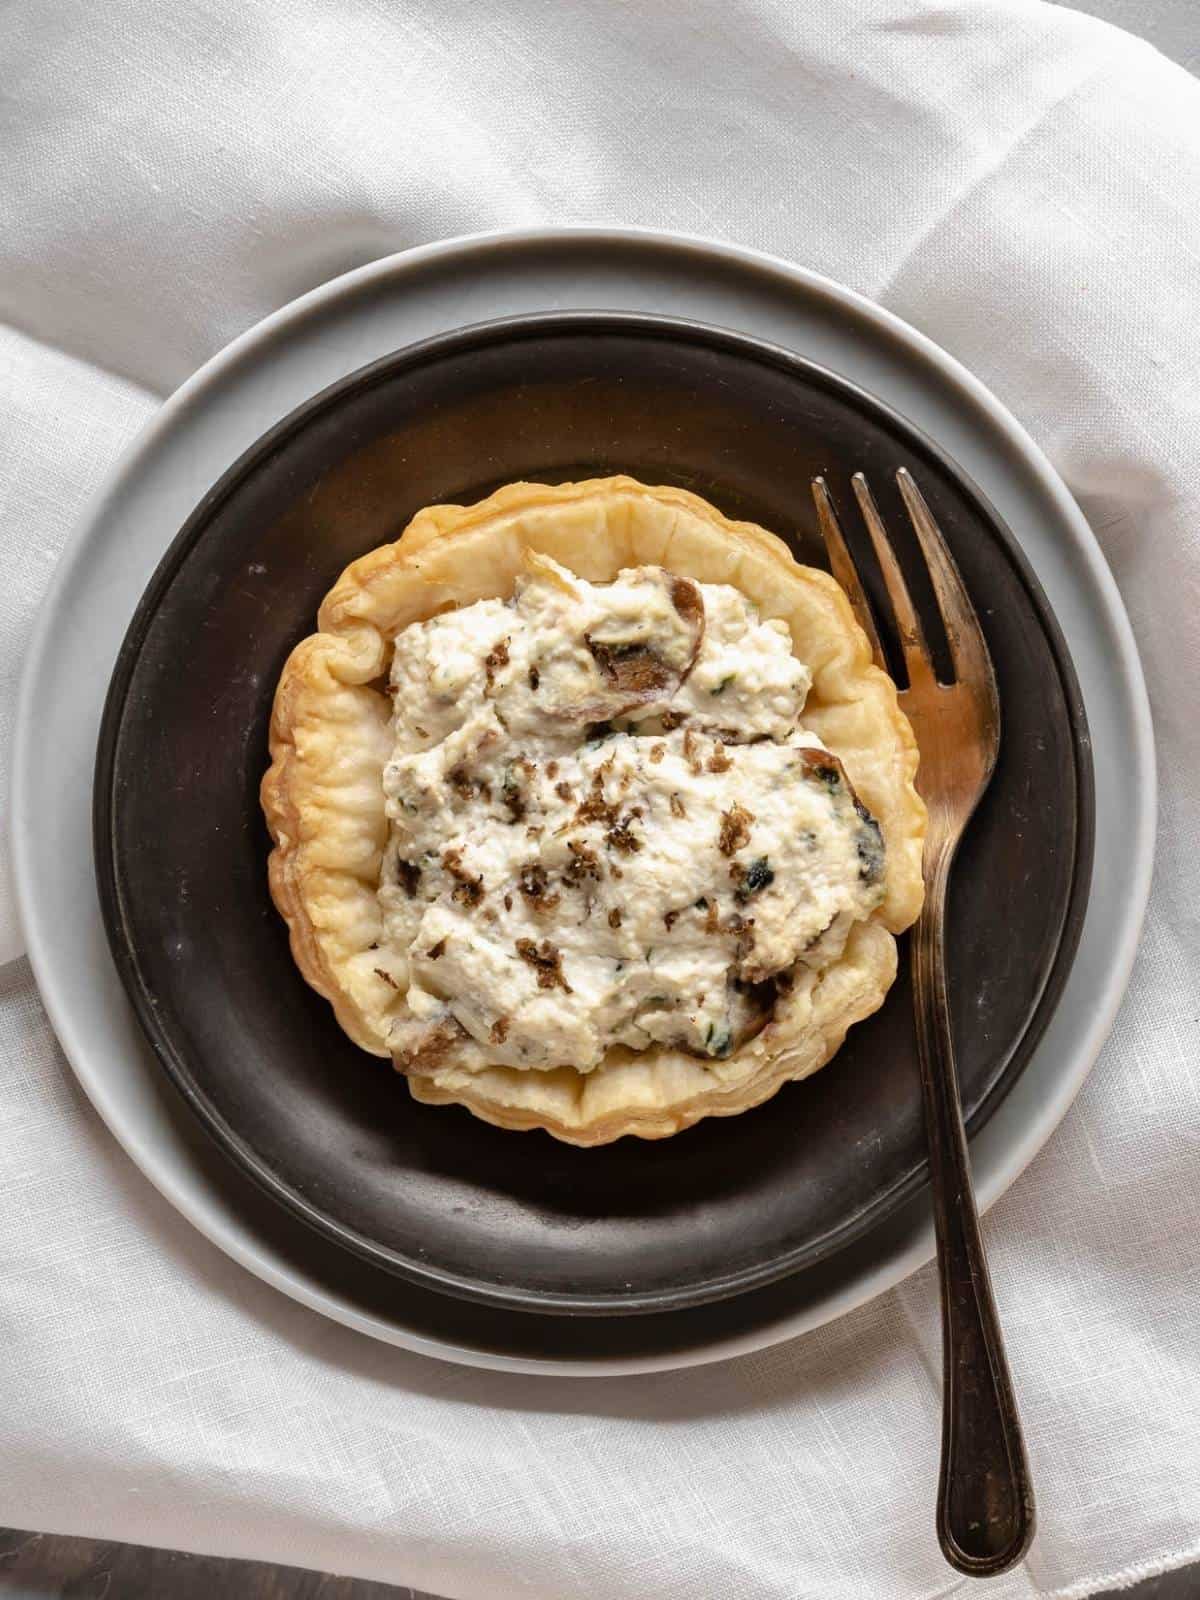 mini-puff-pastry-tart-ricotta-and-mushrooms-truffle-on-saucer-with-fork